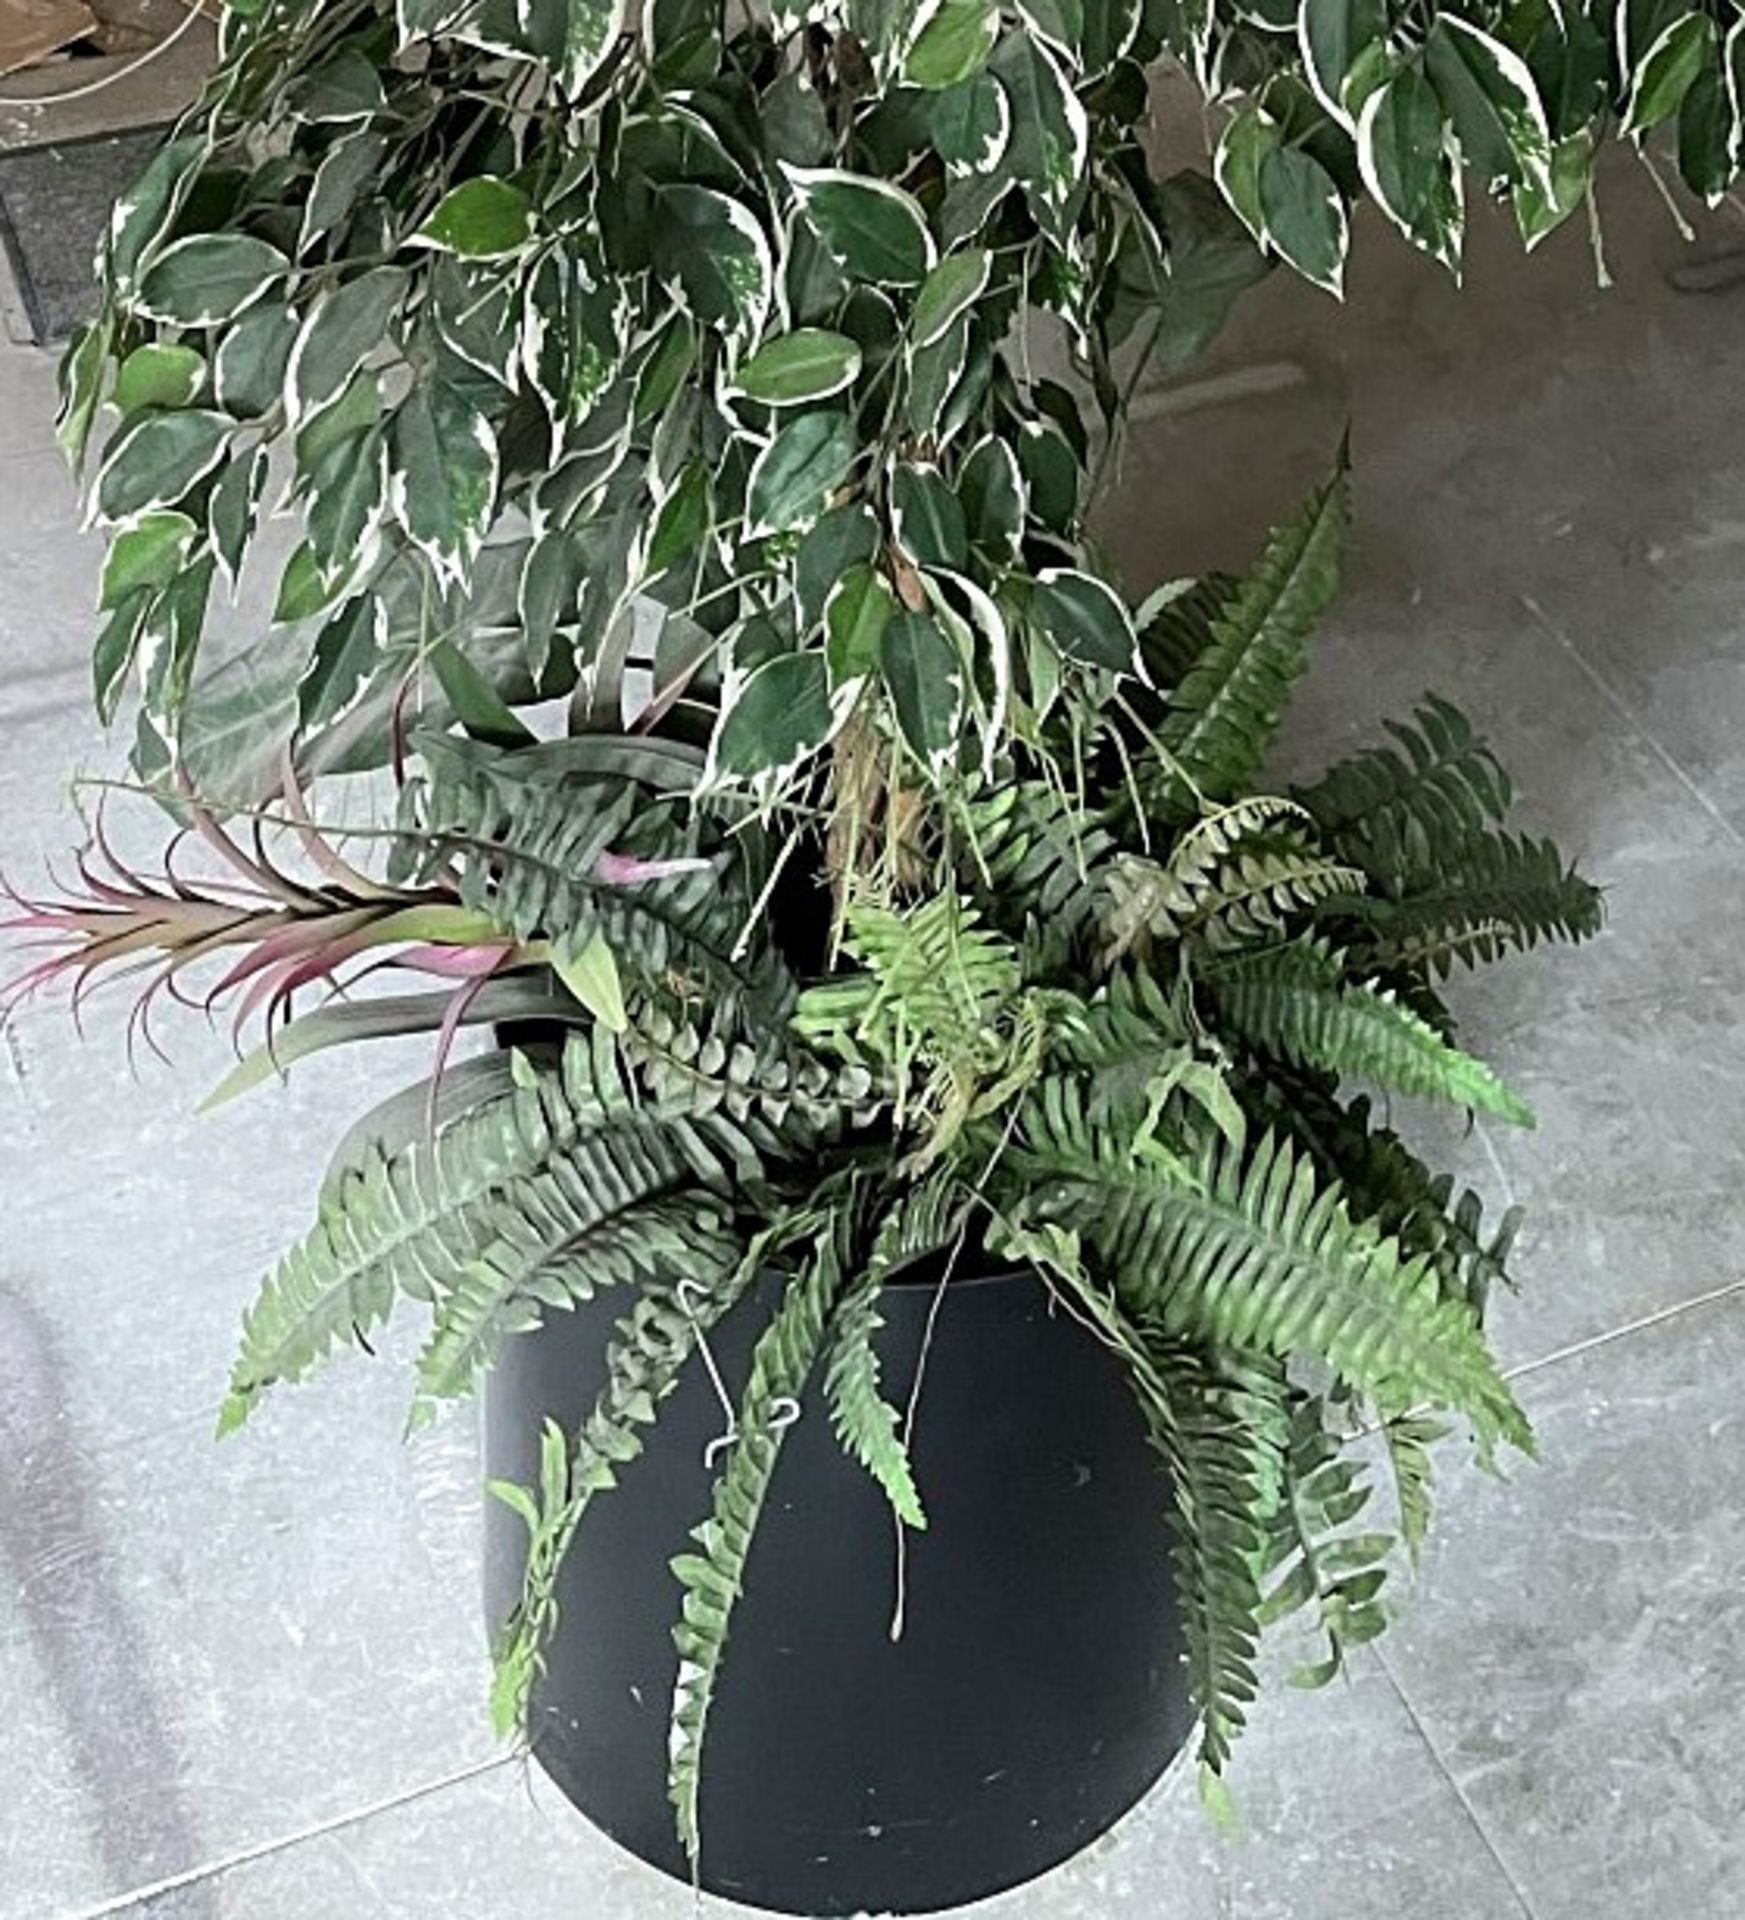 1 x Tall Freestanding Decorative Artificial Plant In Pot - From A Working Office Environment - CL680 - Image 3 of 3